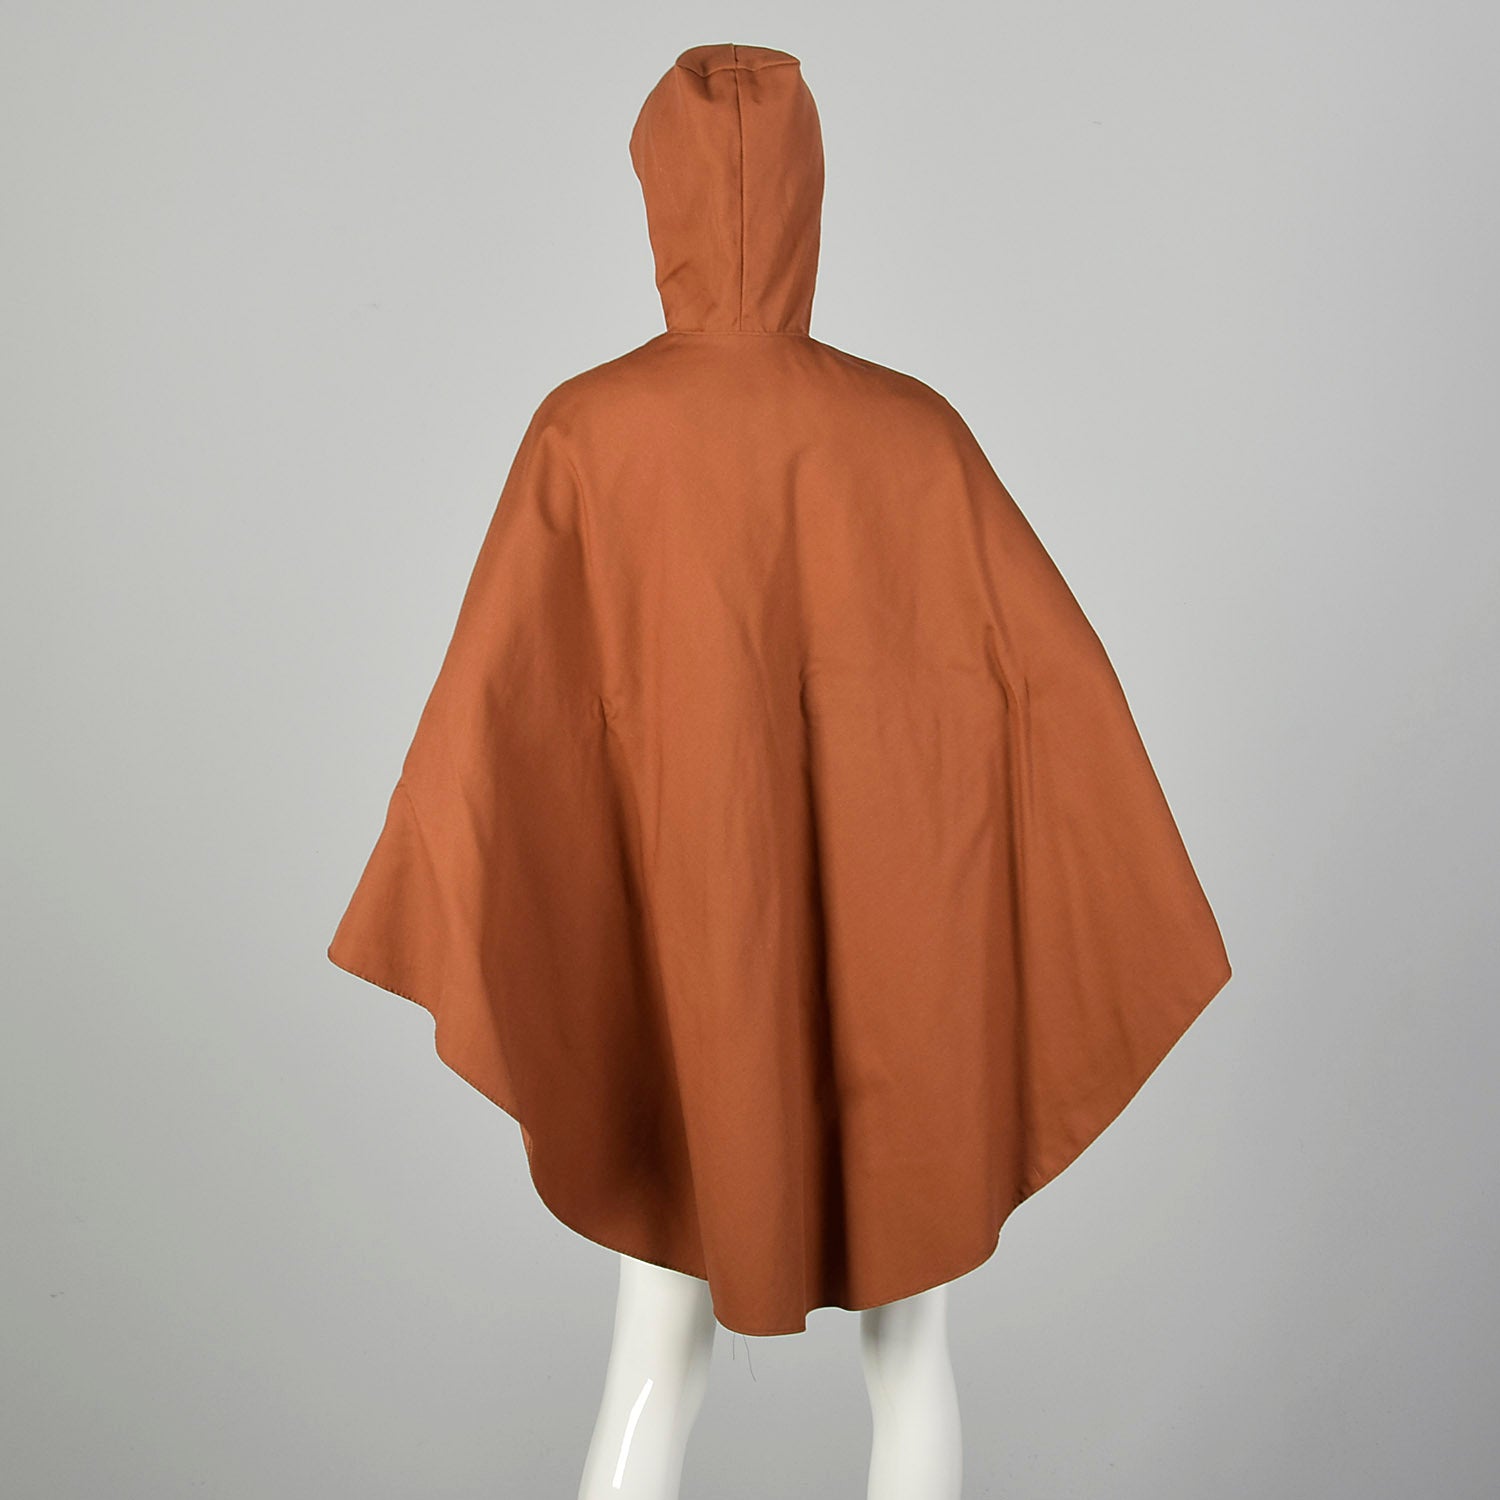 Small 1970s Brown Canvas Button Front Poncho Lightweight Unlined Hooded Cape